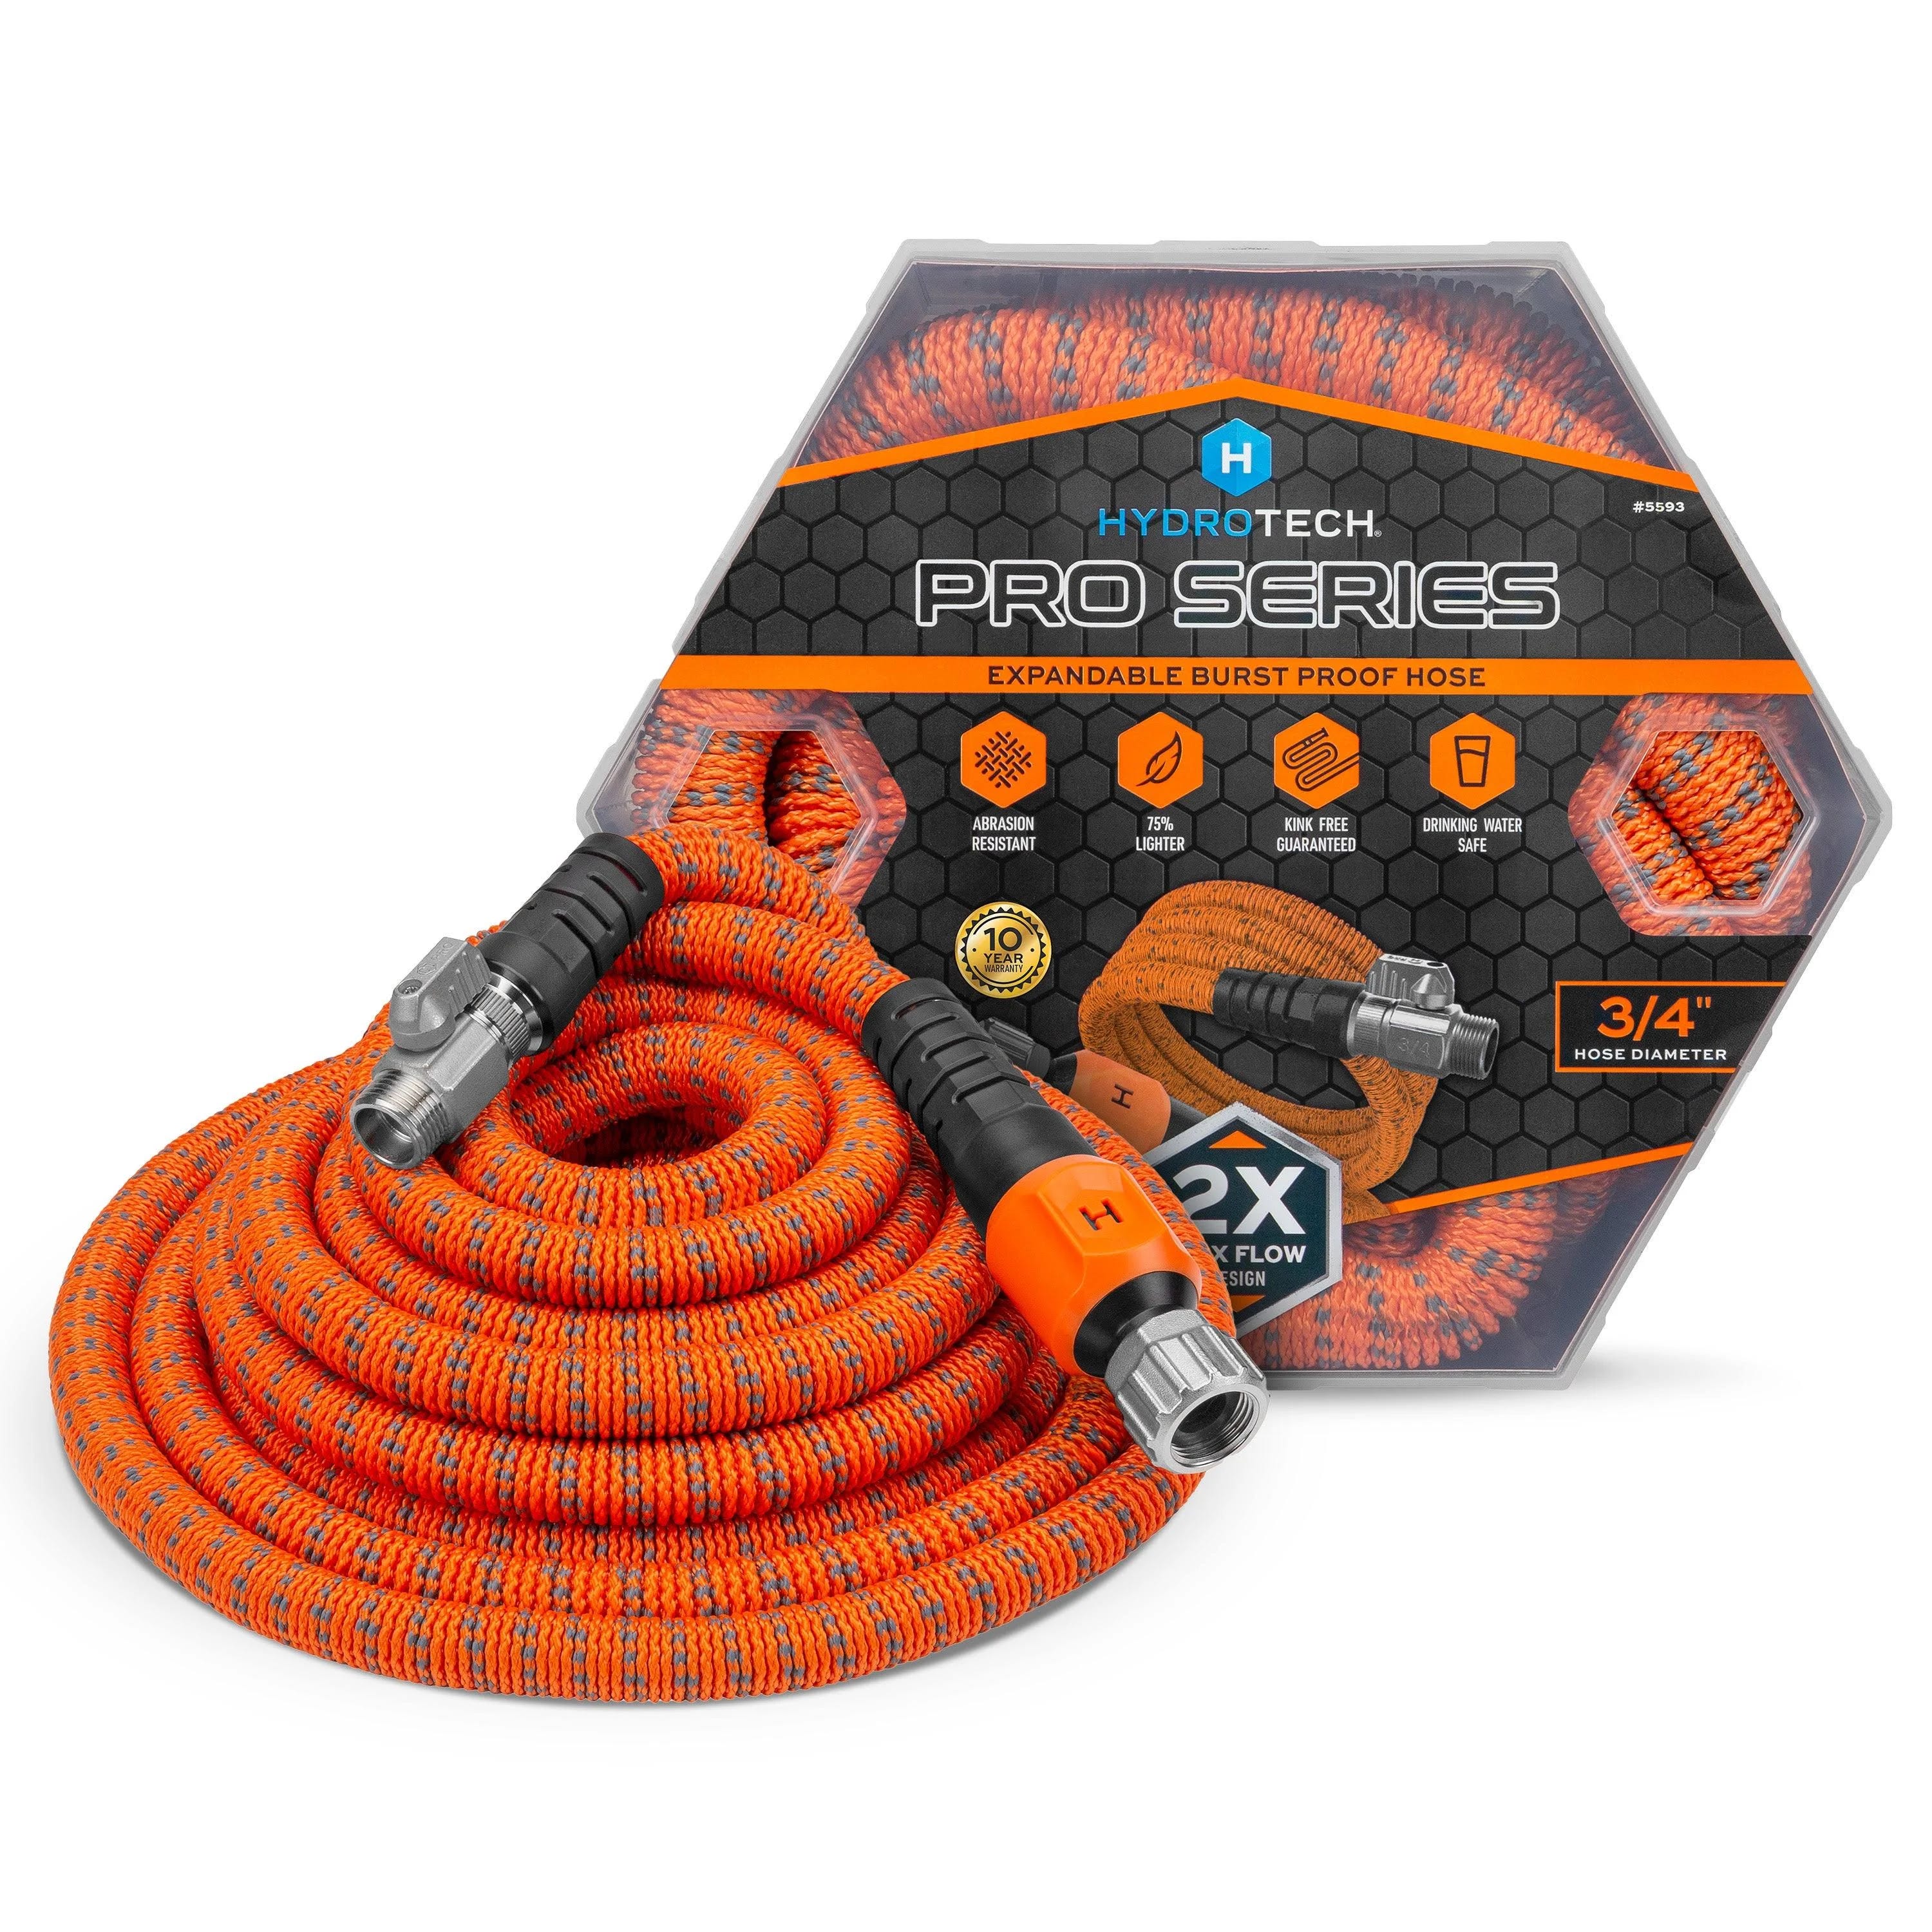 Hydrotech Expandable Burst-Proof Hose for Easy Watering | Image